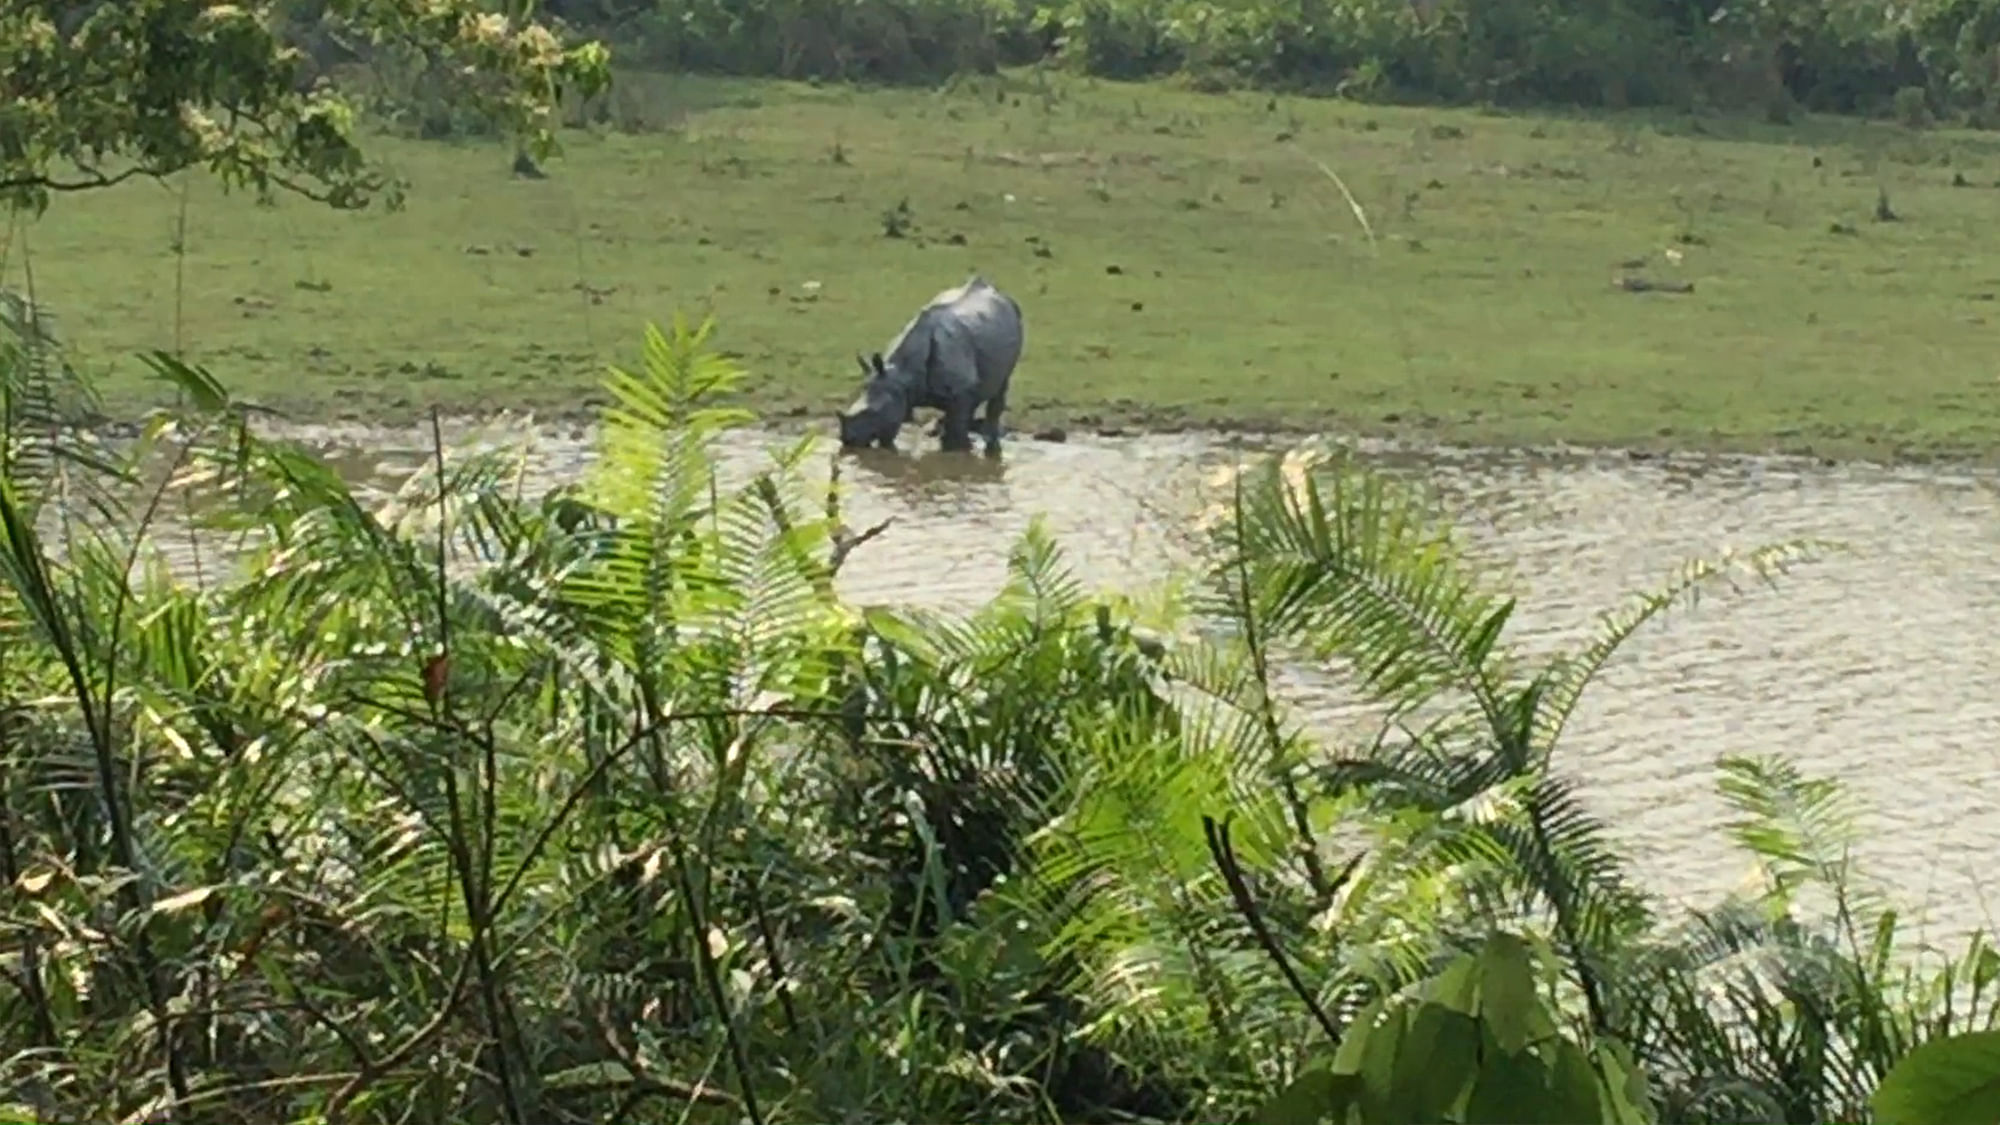 The great one-horned rhino is the reason for the  livelihood of the people staying in and around the Kaziranga National Park. (Photo: <b>The Quint</b>)